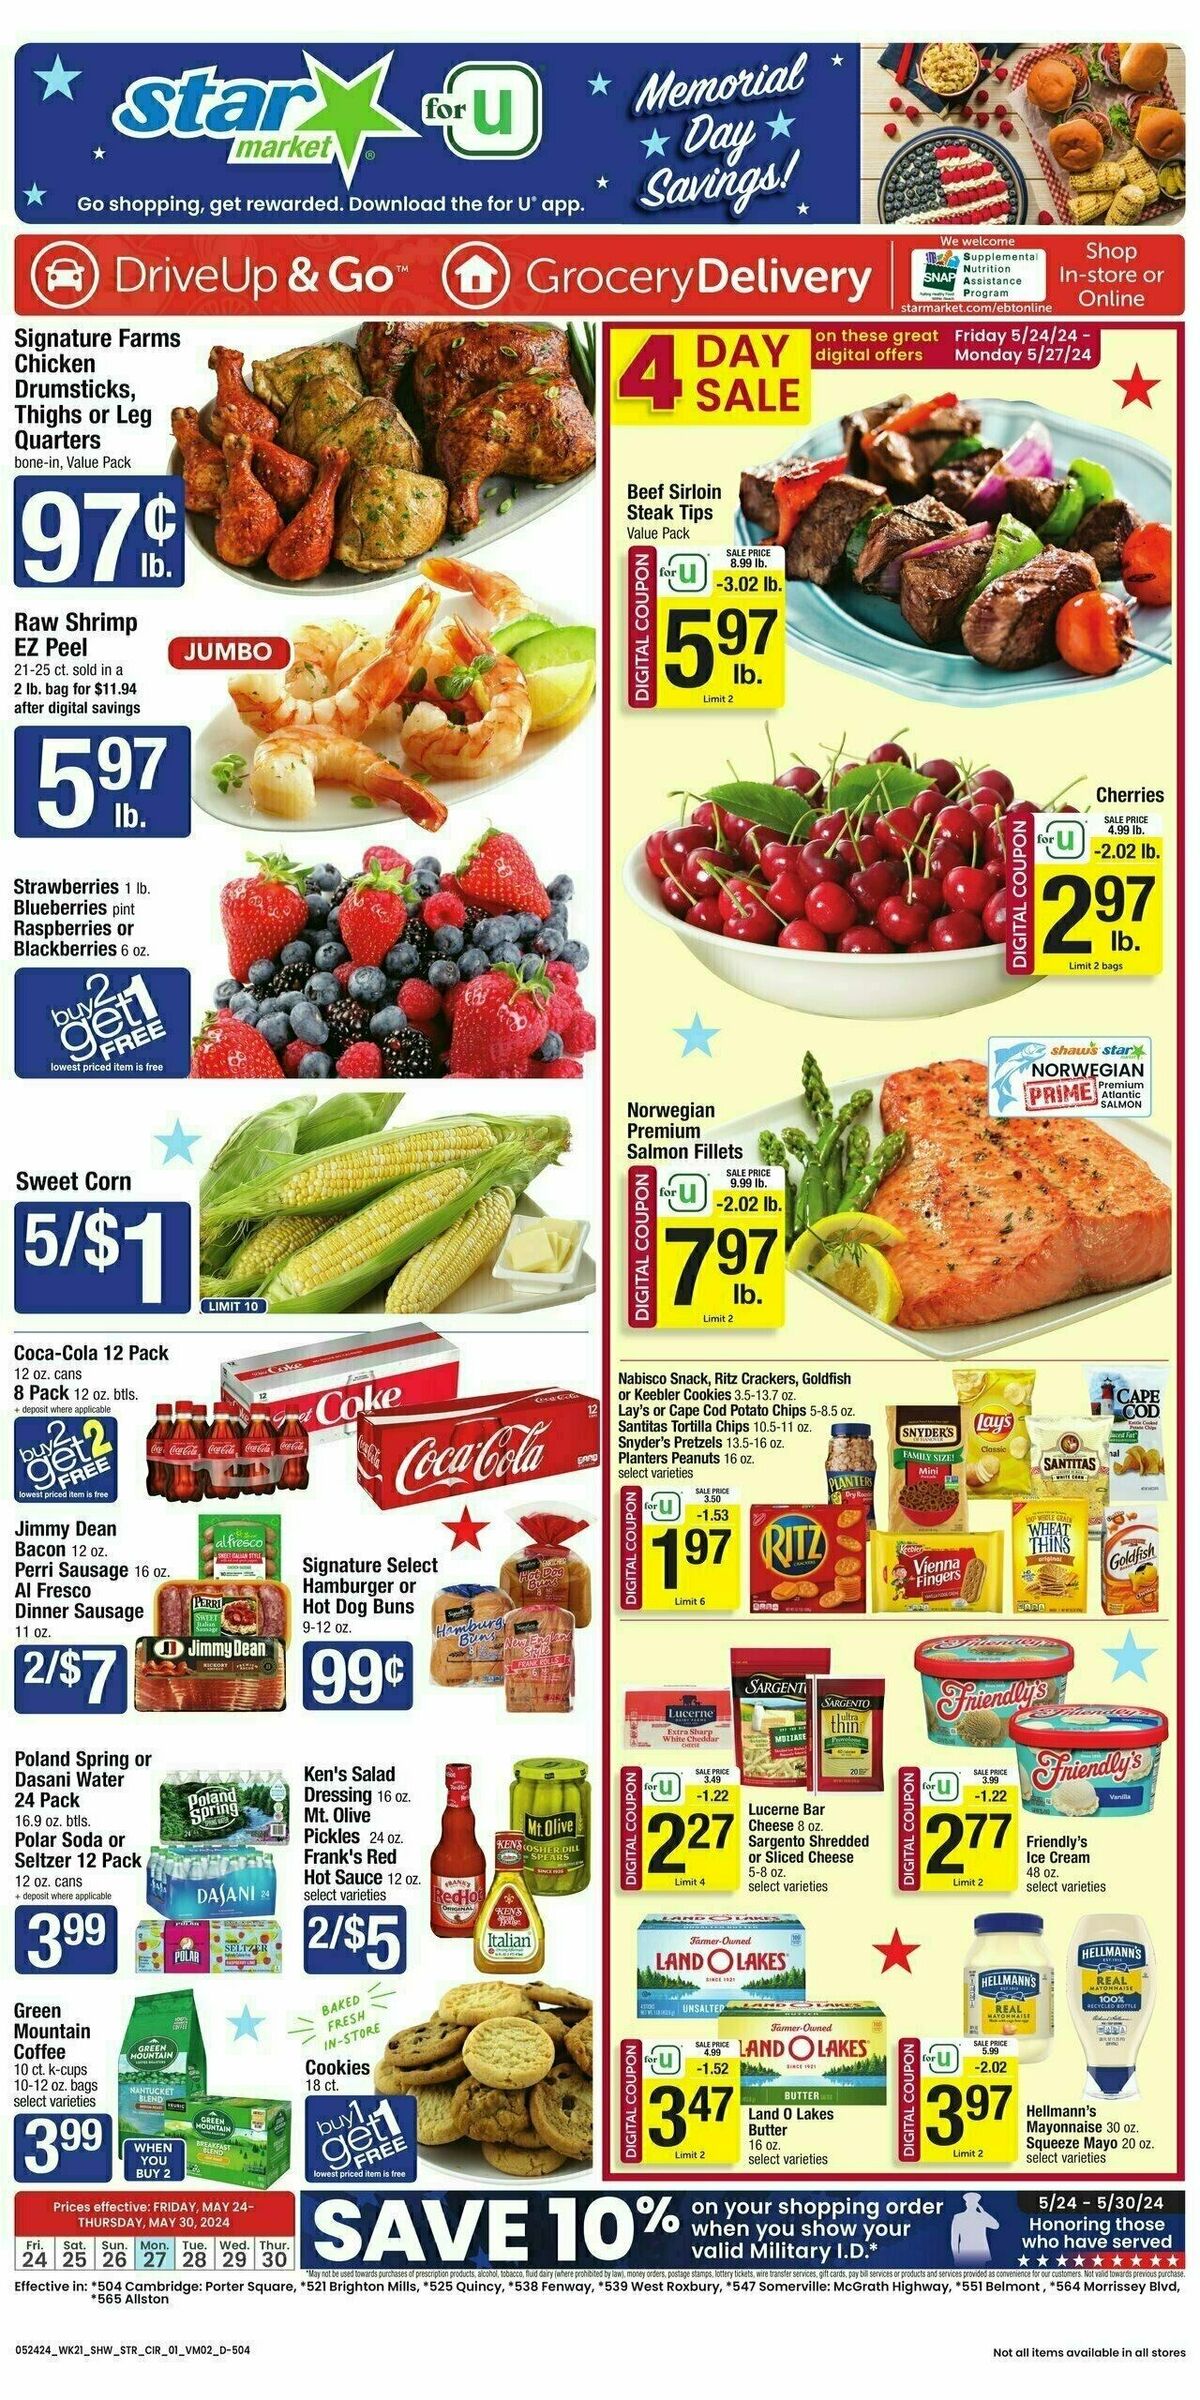 Star Market Weekly Ad from May 24